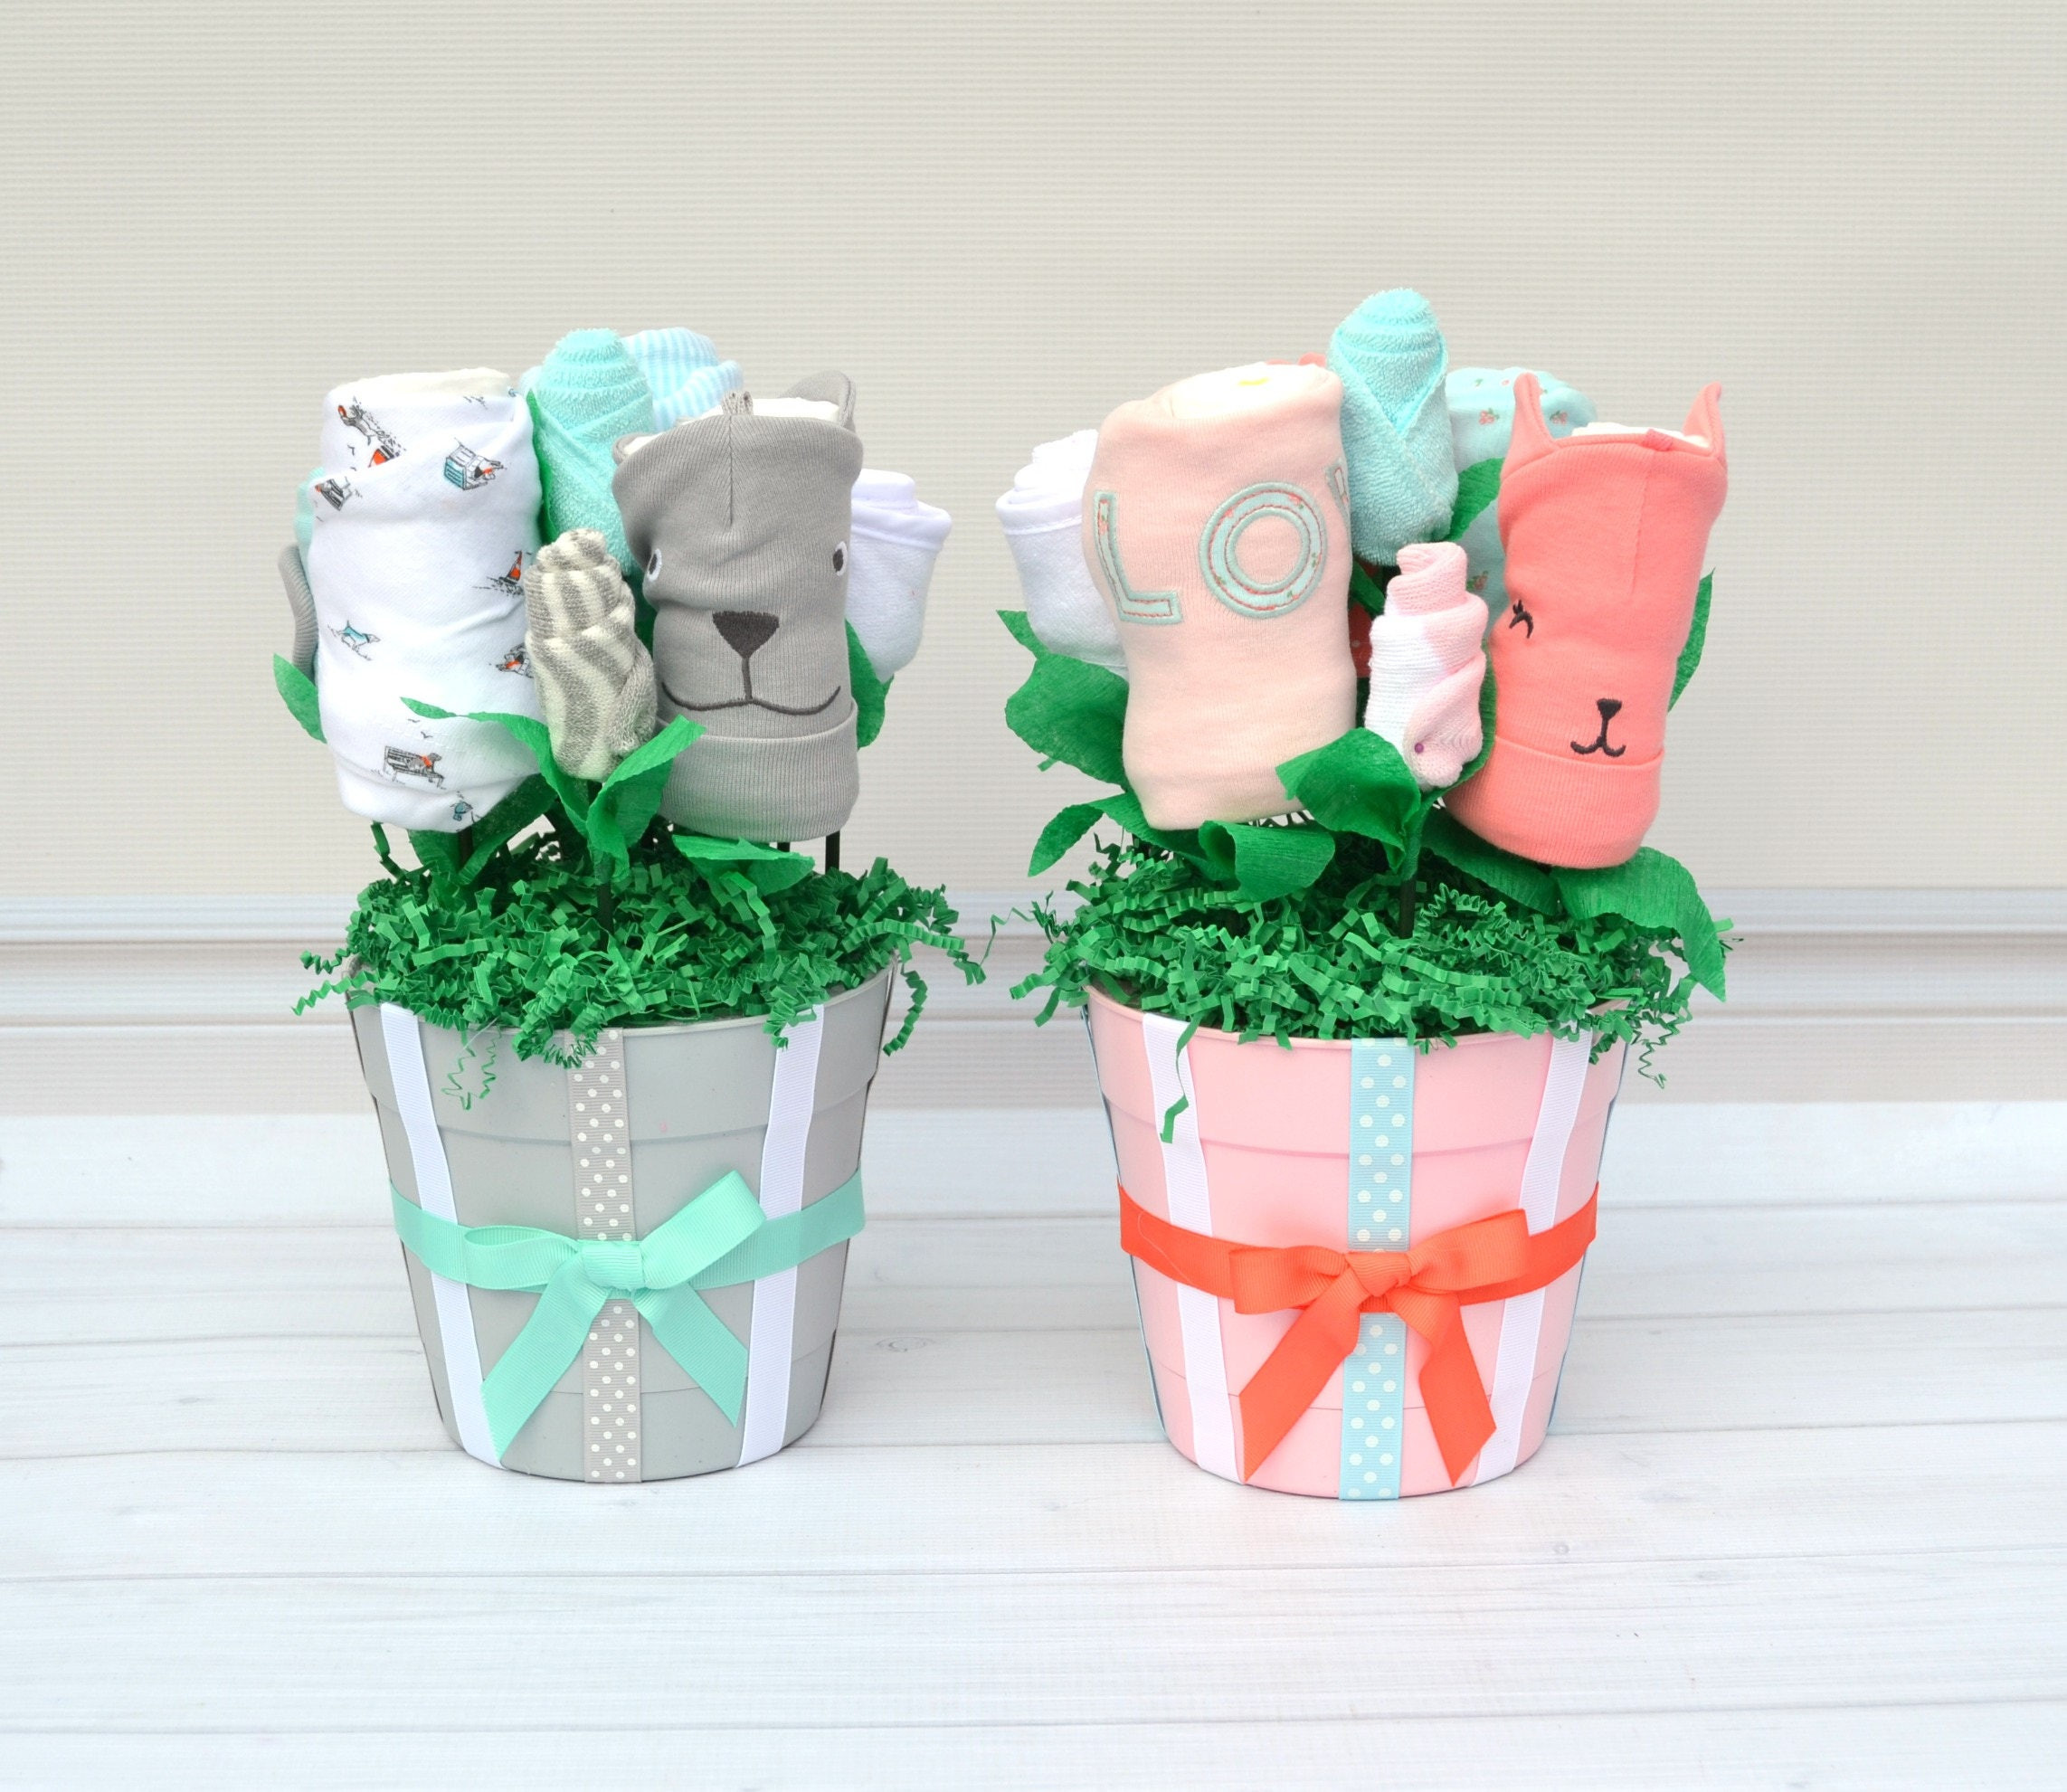 Gift Ideas For Twin Boys
 Girl Boy Twin Gifts Baby Gift for Boy Girl Twins Newborn